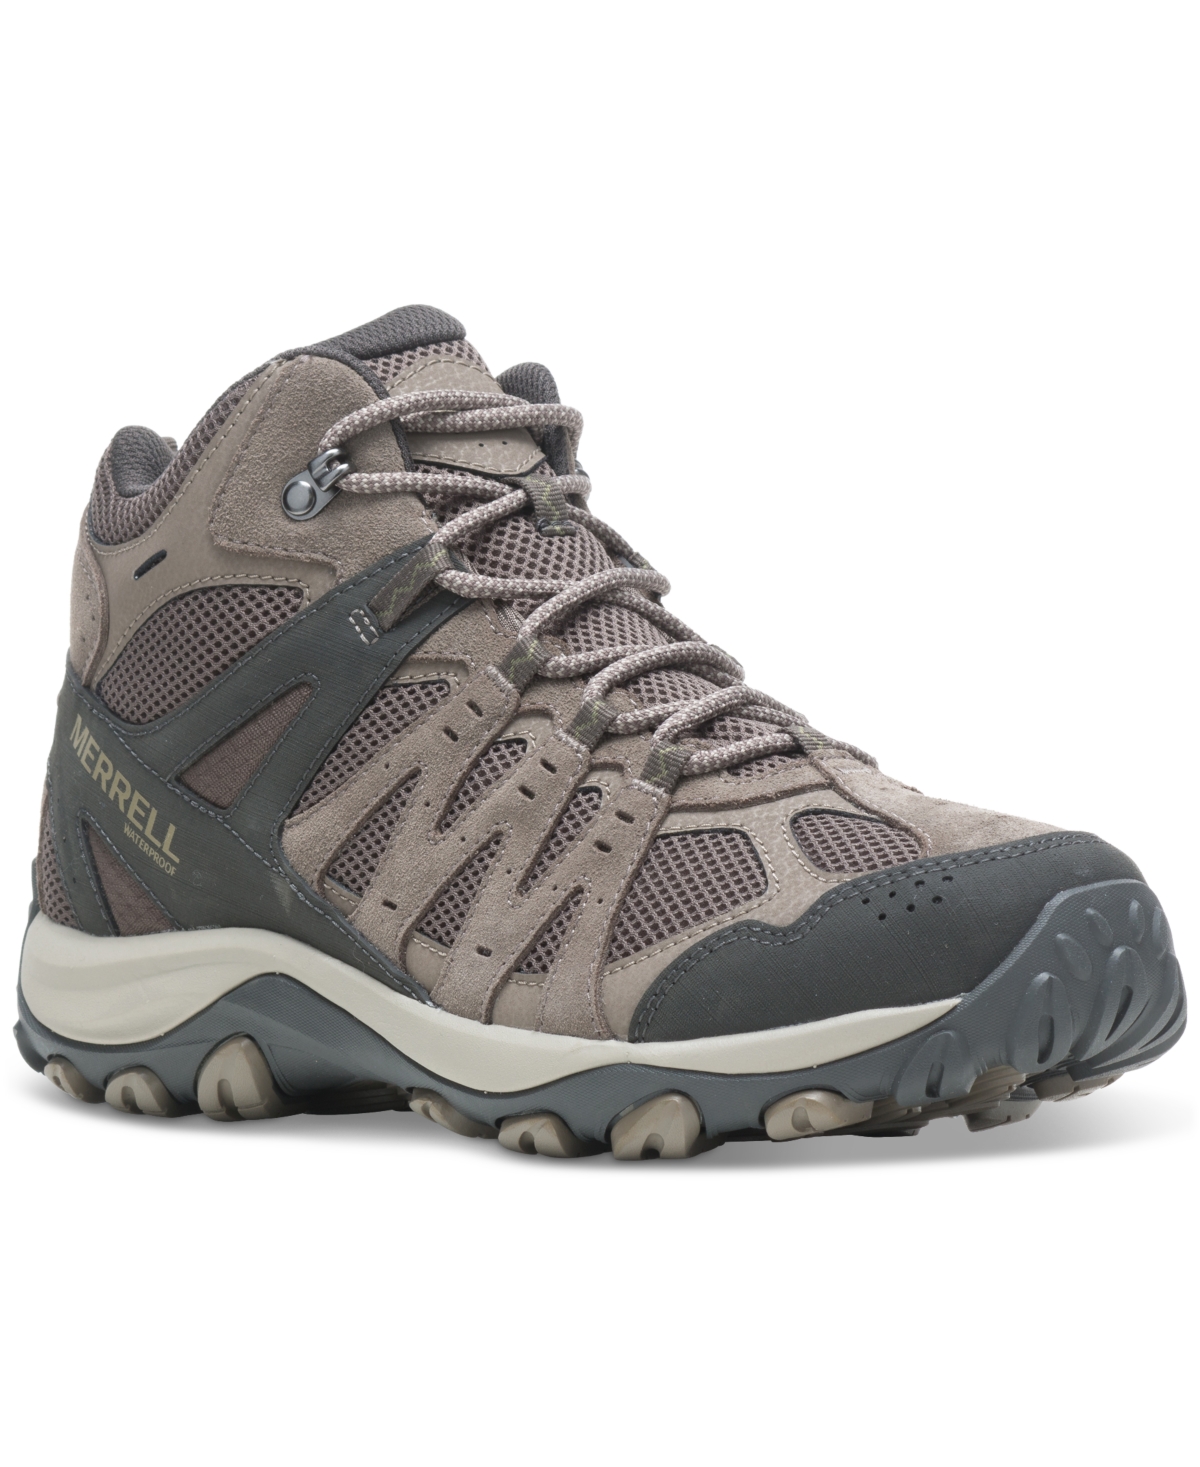 Men's Accentor 3 Mid Waterproof Lace-Up Hiking Boots - Boulder